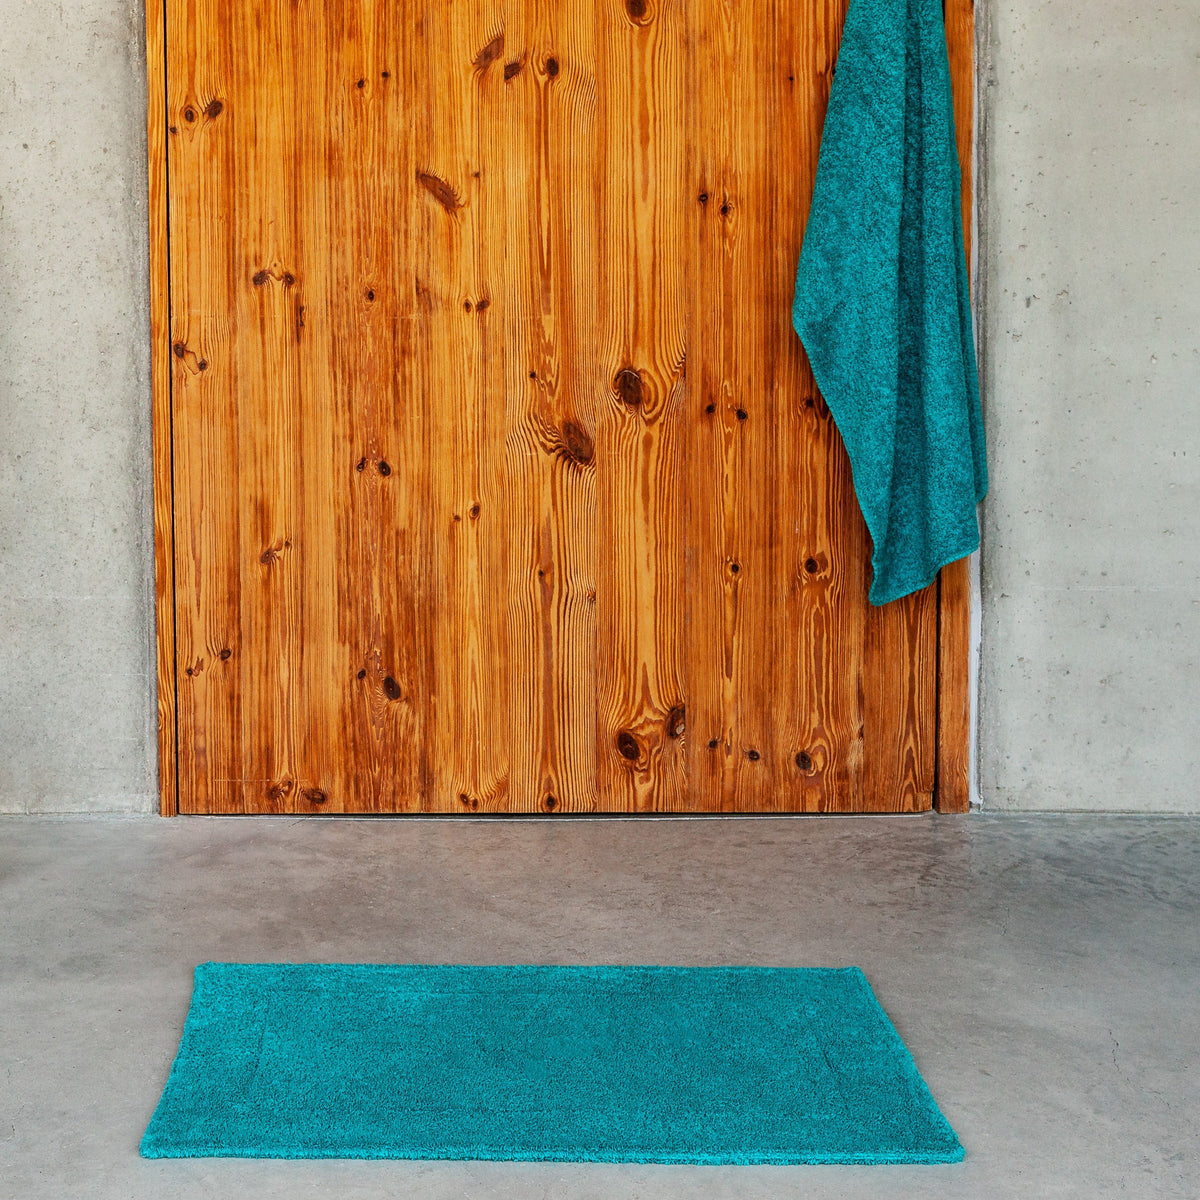 I Tried Ruggable's New Bath Mat and Was Surprised By the Experience